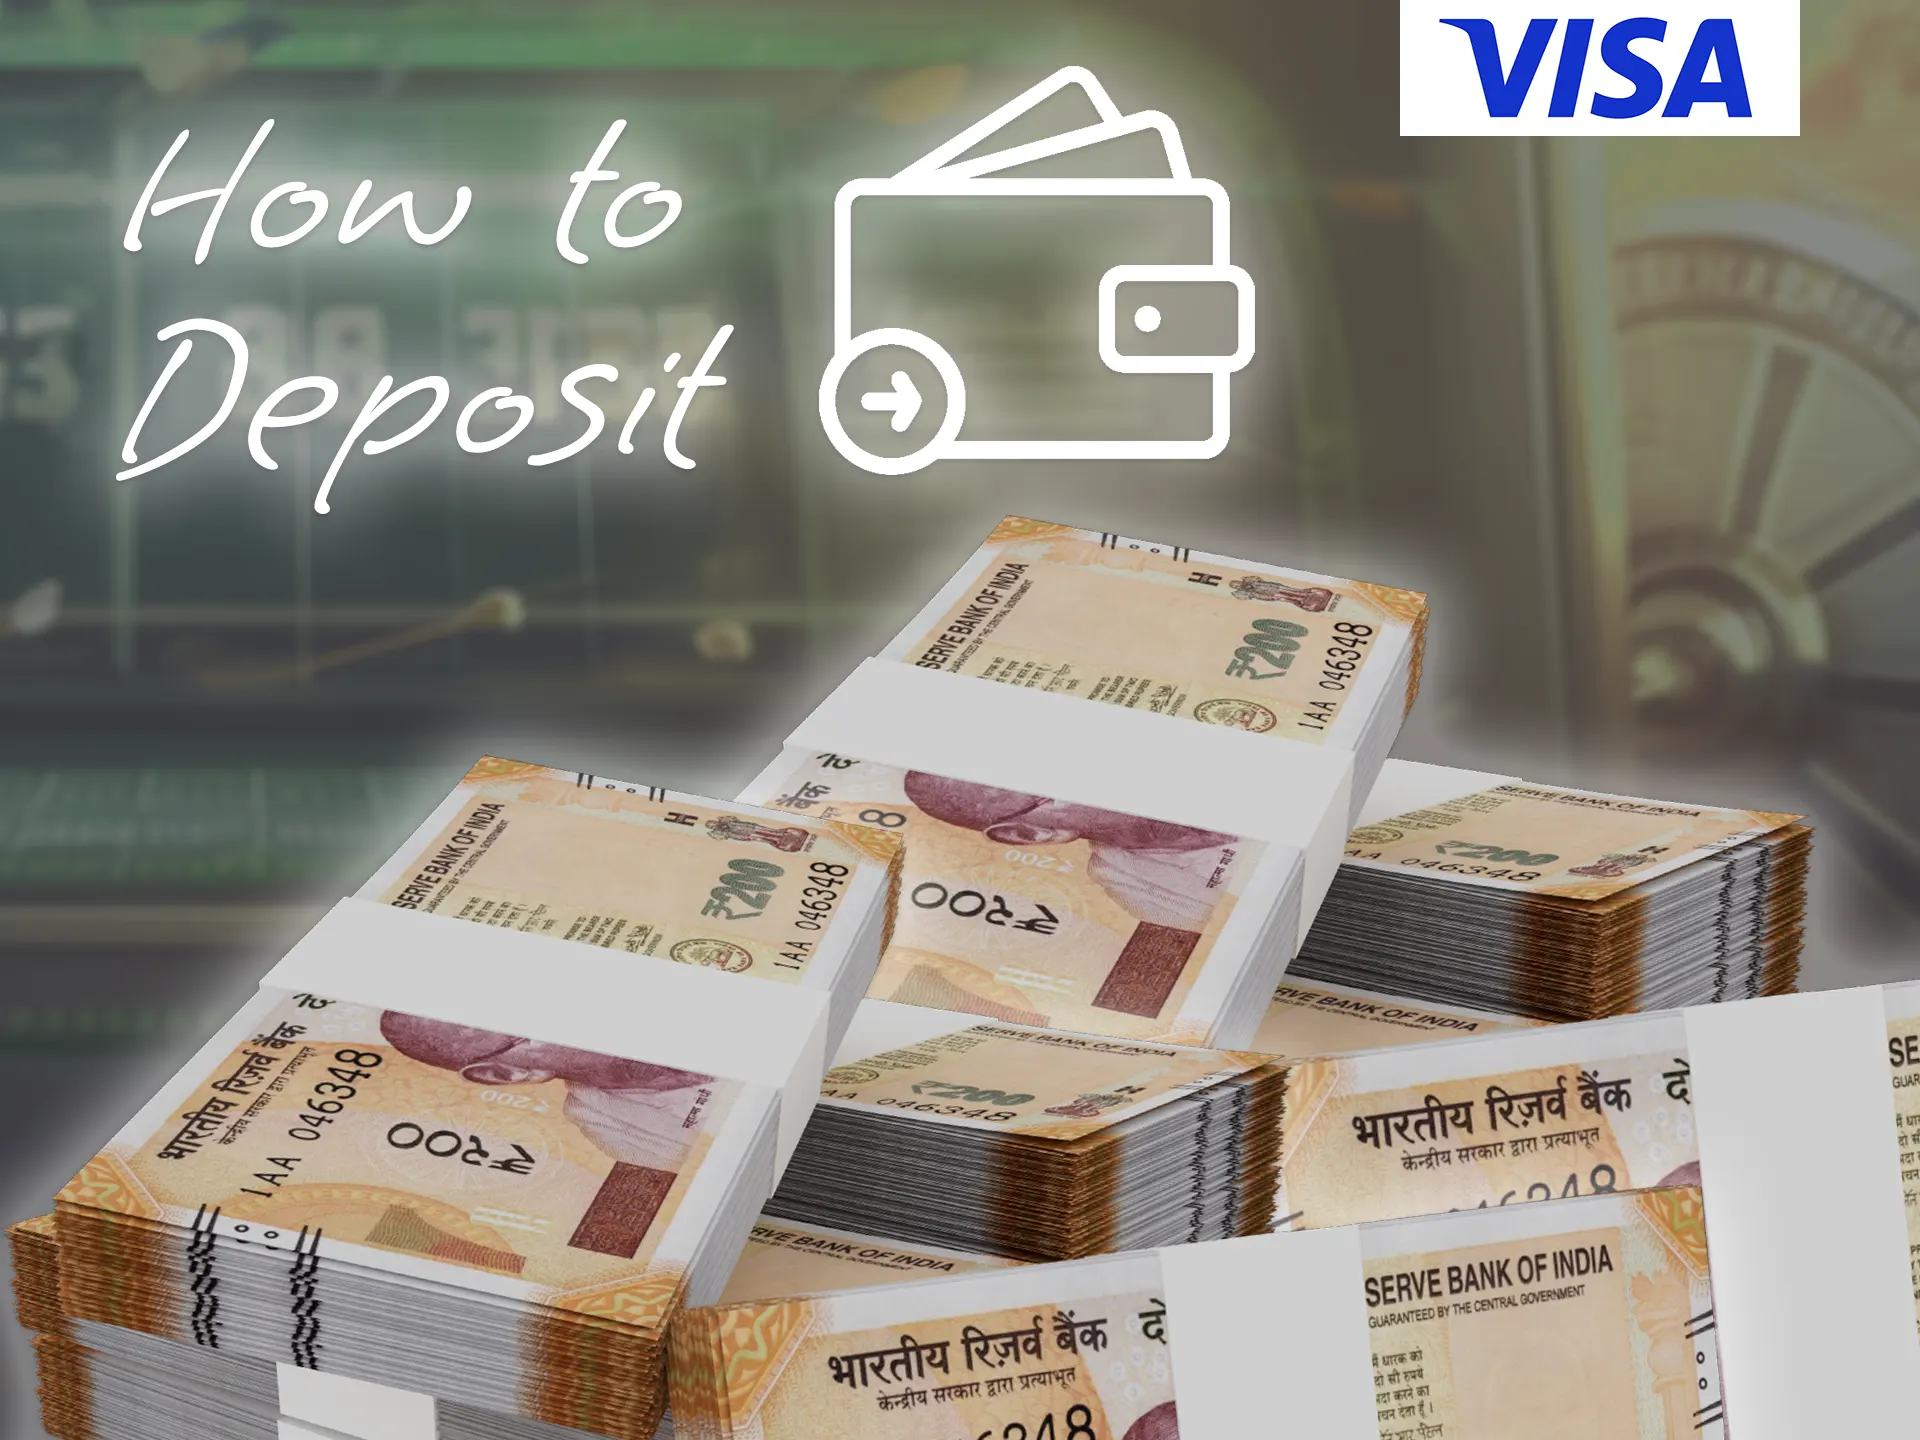 Refill your game account using the Visa payment system.